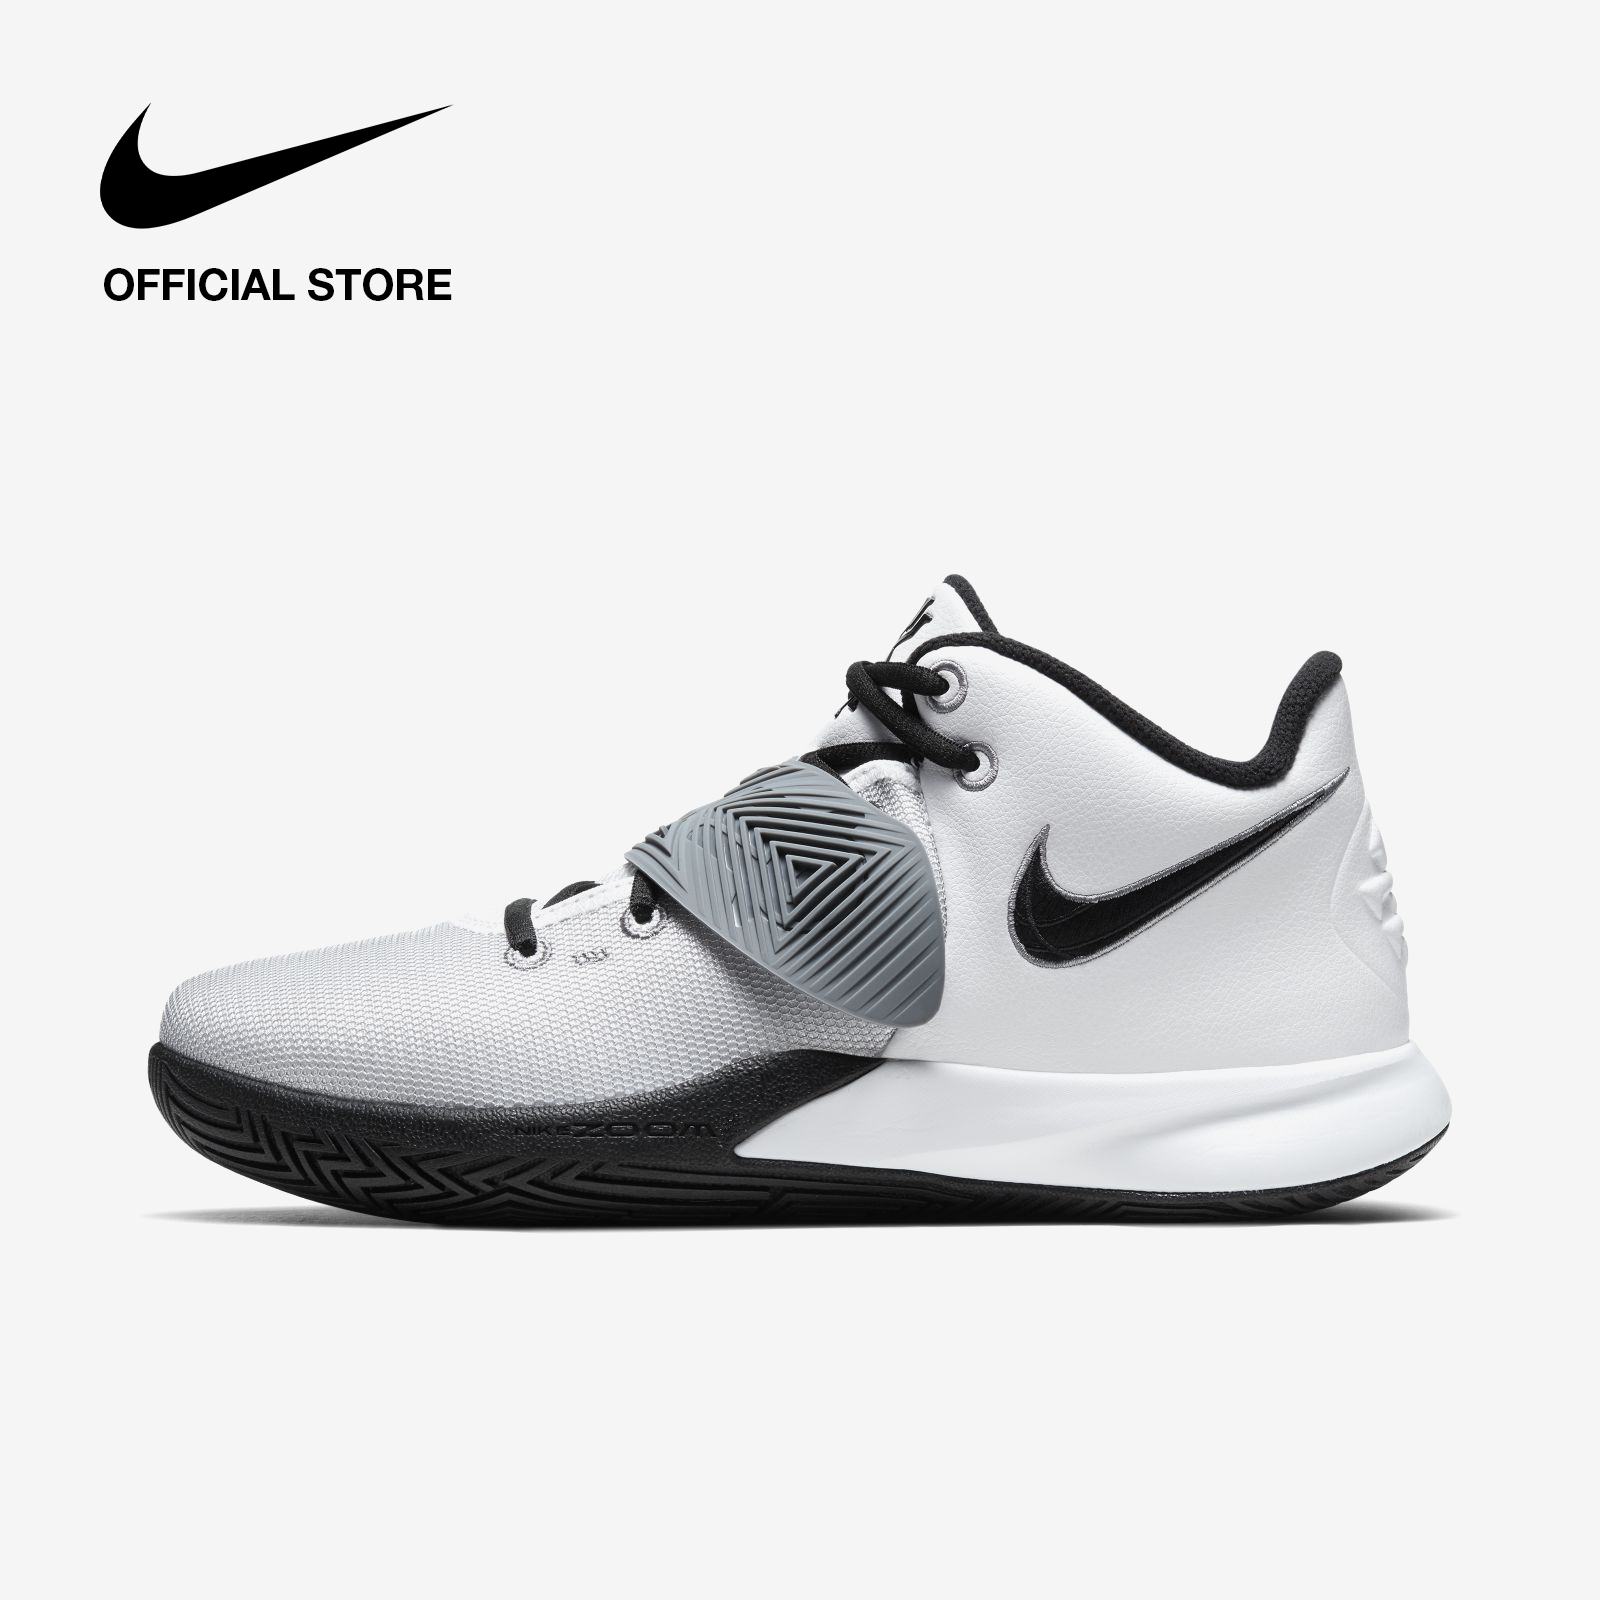 kyrie 3 shoes lazada